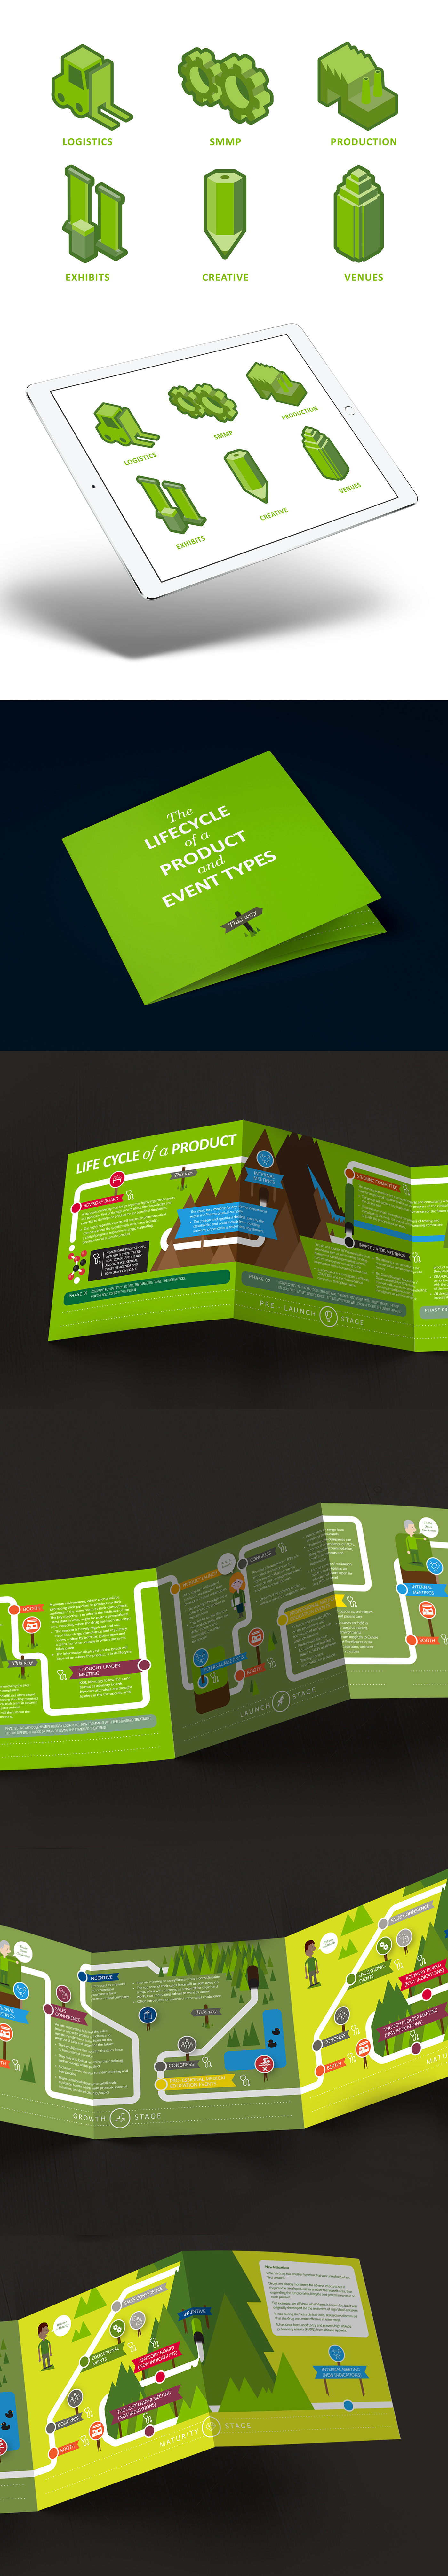 leaflets pdf emailers posters infographics iconography brochures Advertising  cards graphics